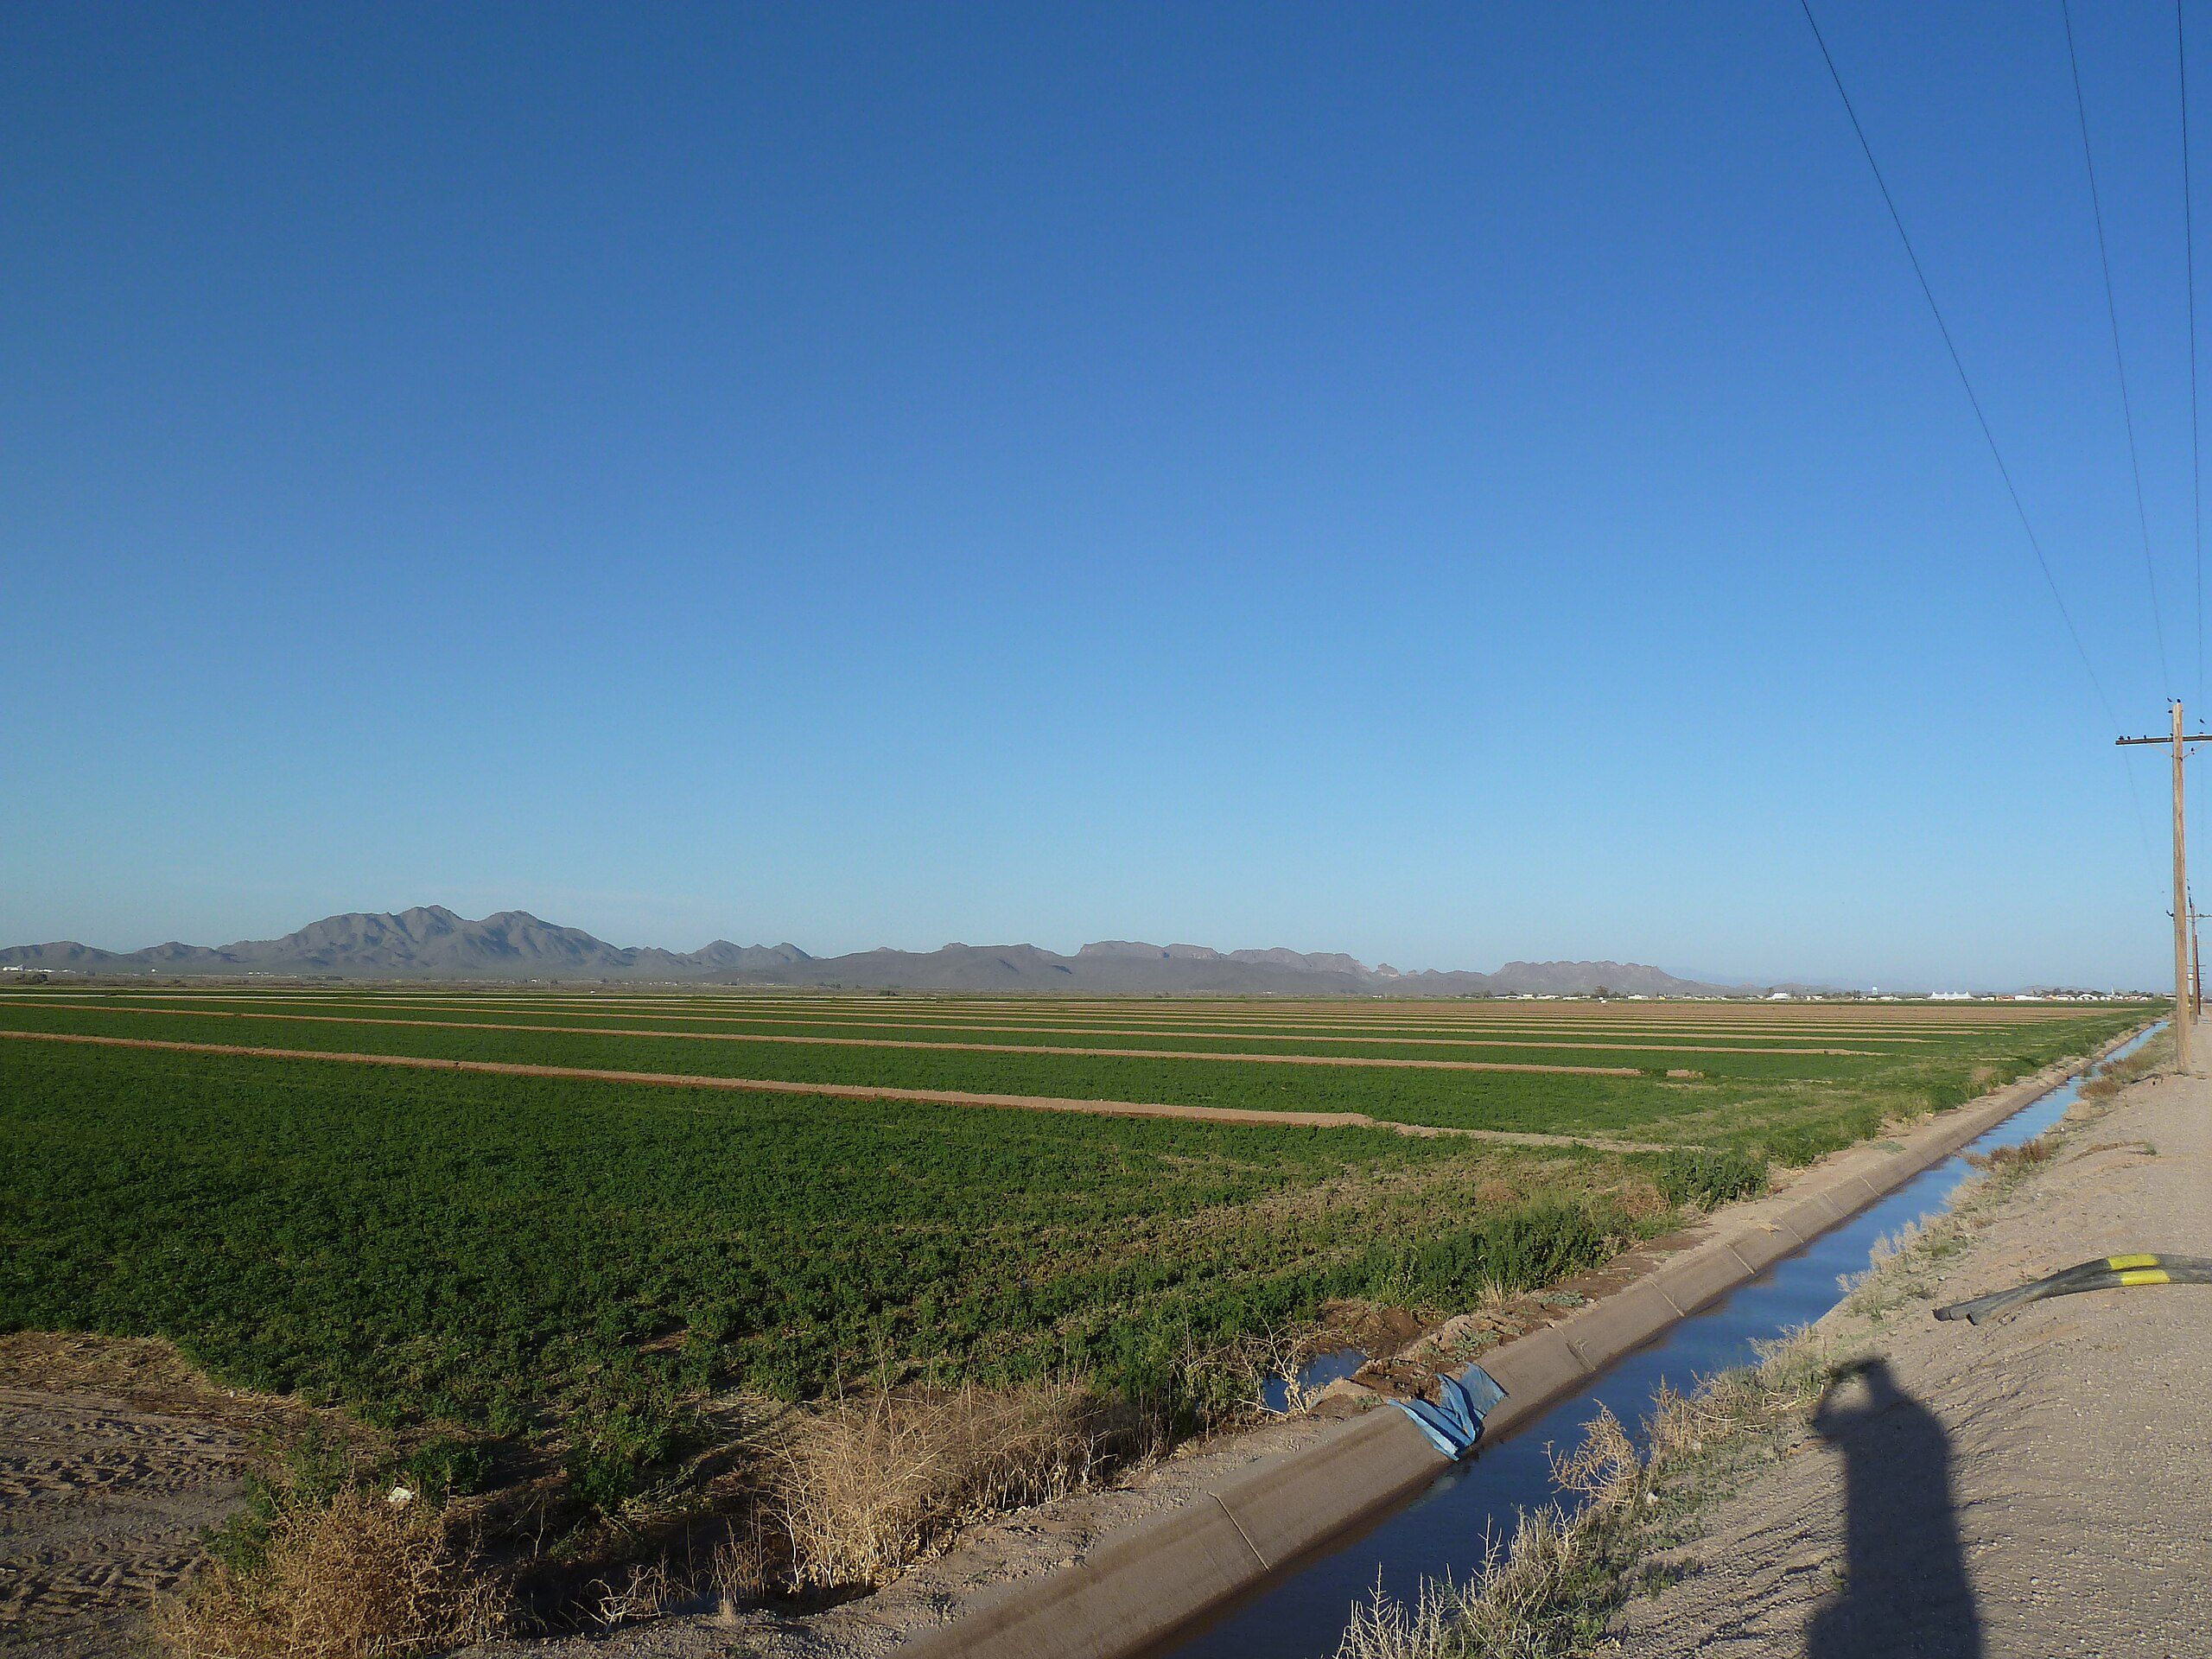 Gila River Farms - the community will soon have solar panels over a stretch of canal